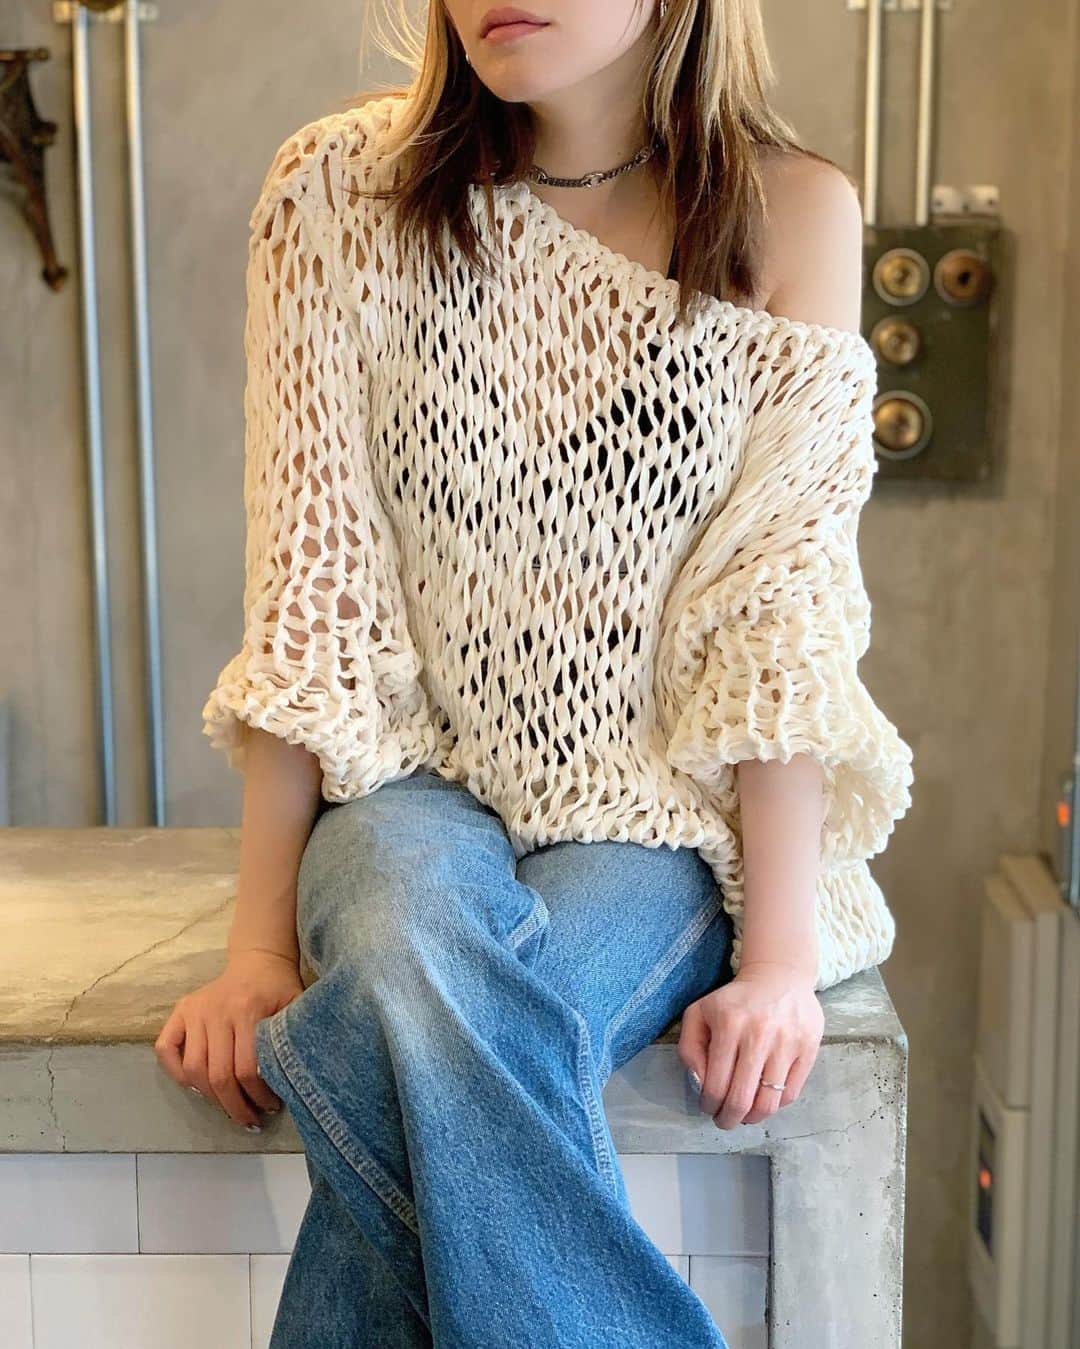 birthdeathさんのインスタグラム写真 - (birthdeathInstagram)「🤍 NEW ARRIVAL 🤍  TOFFS - Off white hand knitted cotton fishnet sweater《Made in France》  ご好評を頂いております birthdeathオリジナルプロダクト『フィッシュネットセーター』の新作コットンニットバージョンが入荷いたしました！  コットン100%素材を使用し、手作業で丁寧に編み立てられた贅沢なニットセーター。 立体感のあるローゲージのルーズな編み目からヘルシーに素肌が覗き、洗練されたスタイルを演出します。 ナチュラルな風合いのコットン素材のニットは通気性も良く、オールシーズンお楽しみいただけます。  ✔️オンラインストアにも掲載済みです。 是非ご覧になってみてください。  #thetokyofreefashionsociety  #birthdeath  『The Tokyo Free Fashion Society (TOFFS) 』is an original product that is manufactured irregularly.  This is a high-quality sweater made of 100% cotton and knitted by hand. The healthy bare skin peeping through the three-dimensional low gauge mesh creates a sophisticated style. Natural cotton knitwear is breathable and can be enjoyed regardless of season.  A cotton fishnet sweater made by hand, commissioned by a skilled knitting artist who lives in France and has a career of more than 50 years. Since all the processes are done by hand in France, the production volume is limited and we sell them in limited quantities.  ✔️ It has already been posted on our online store. Please take a look.」5月12日 17時46分 - birthdeath_tokyo